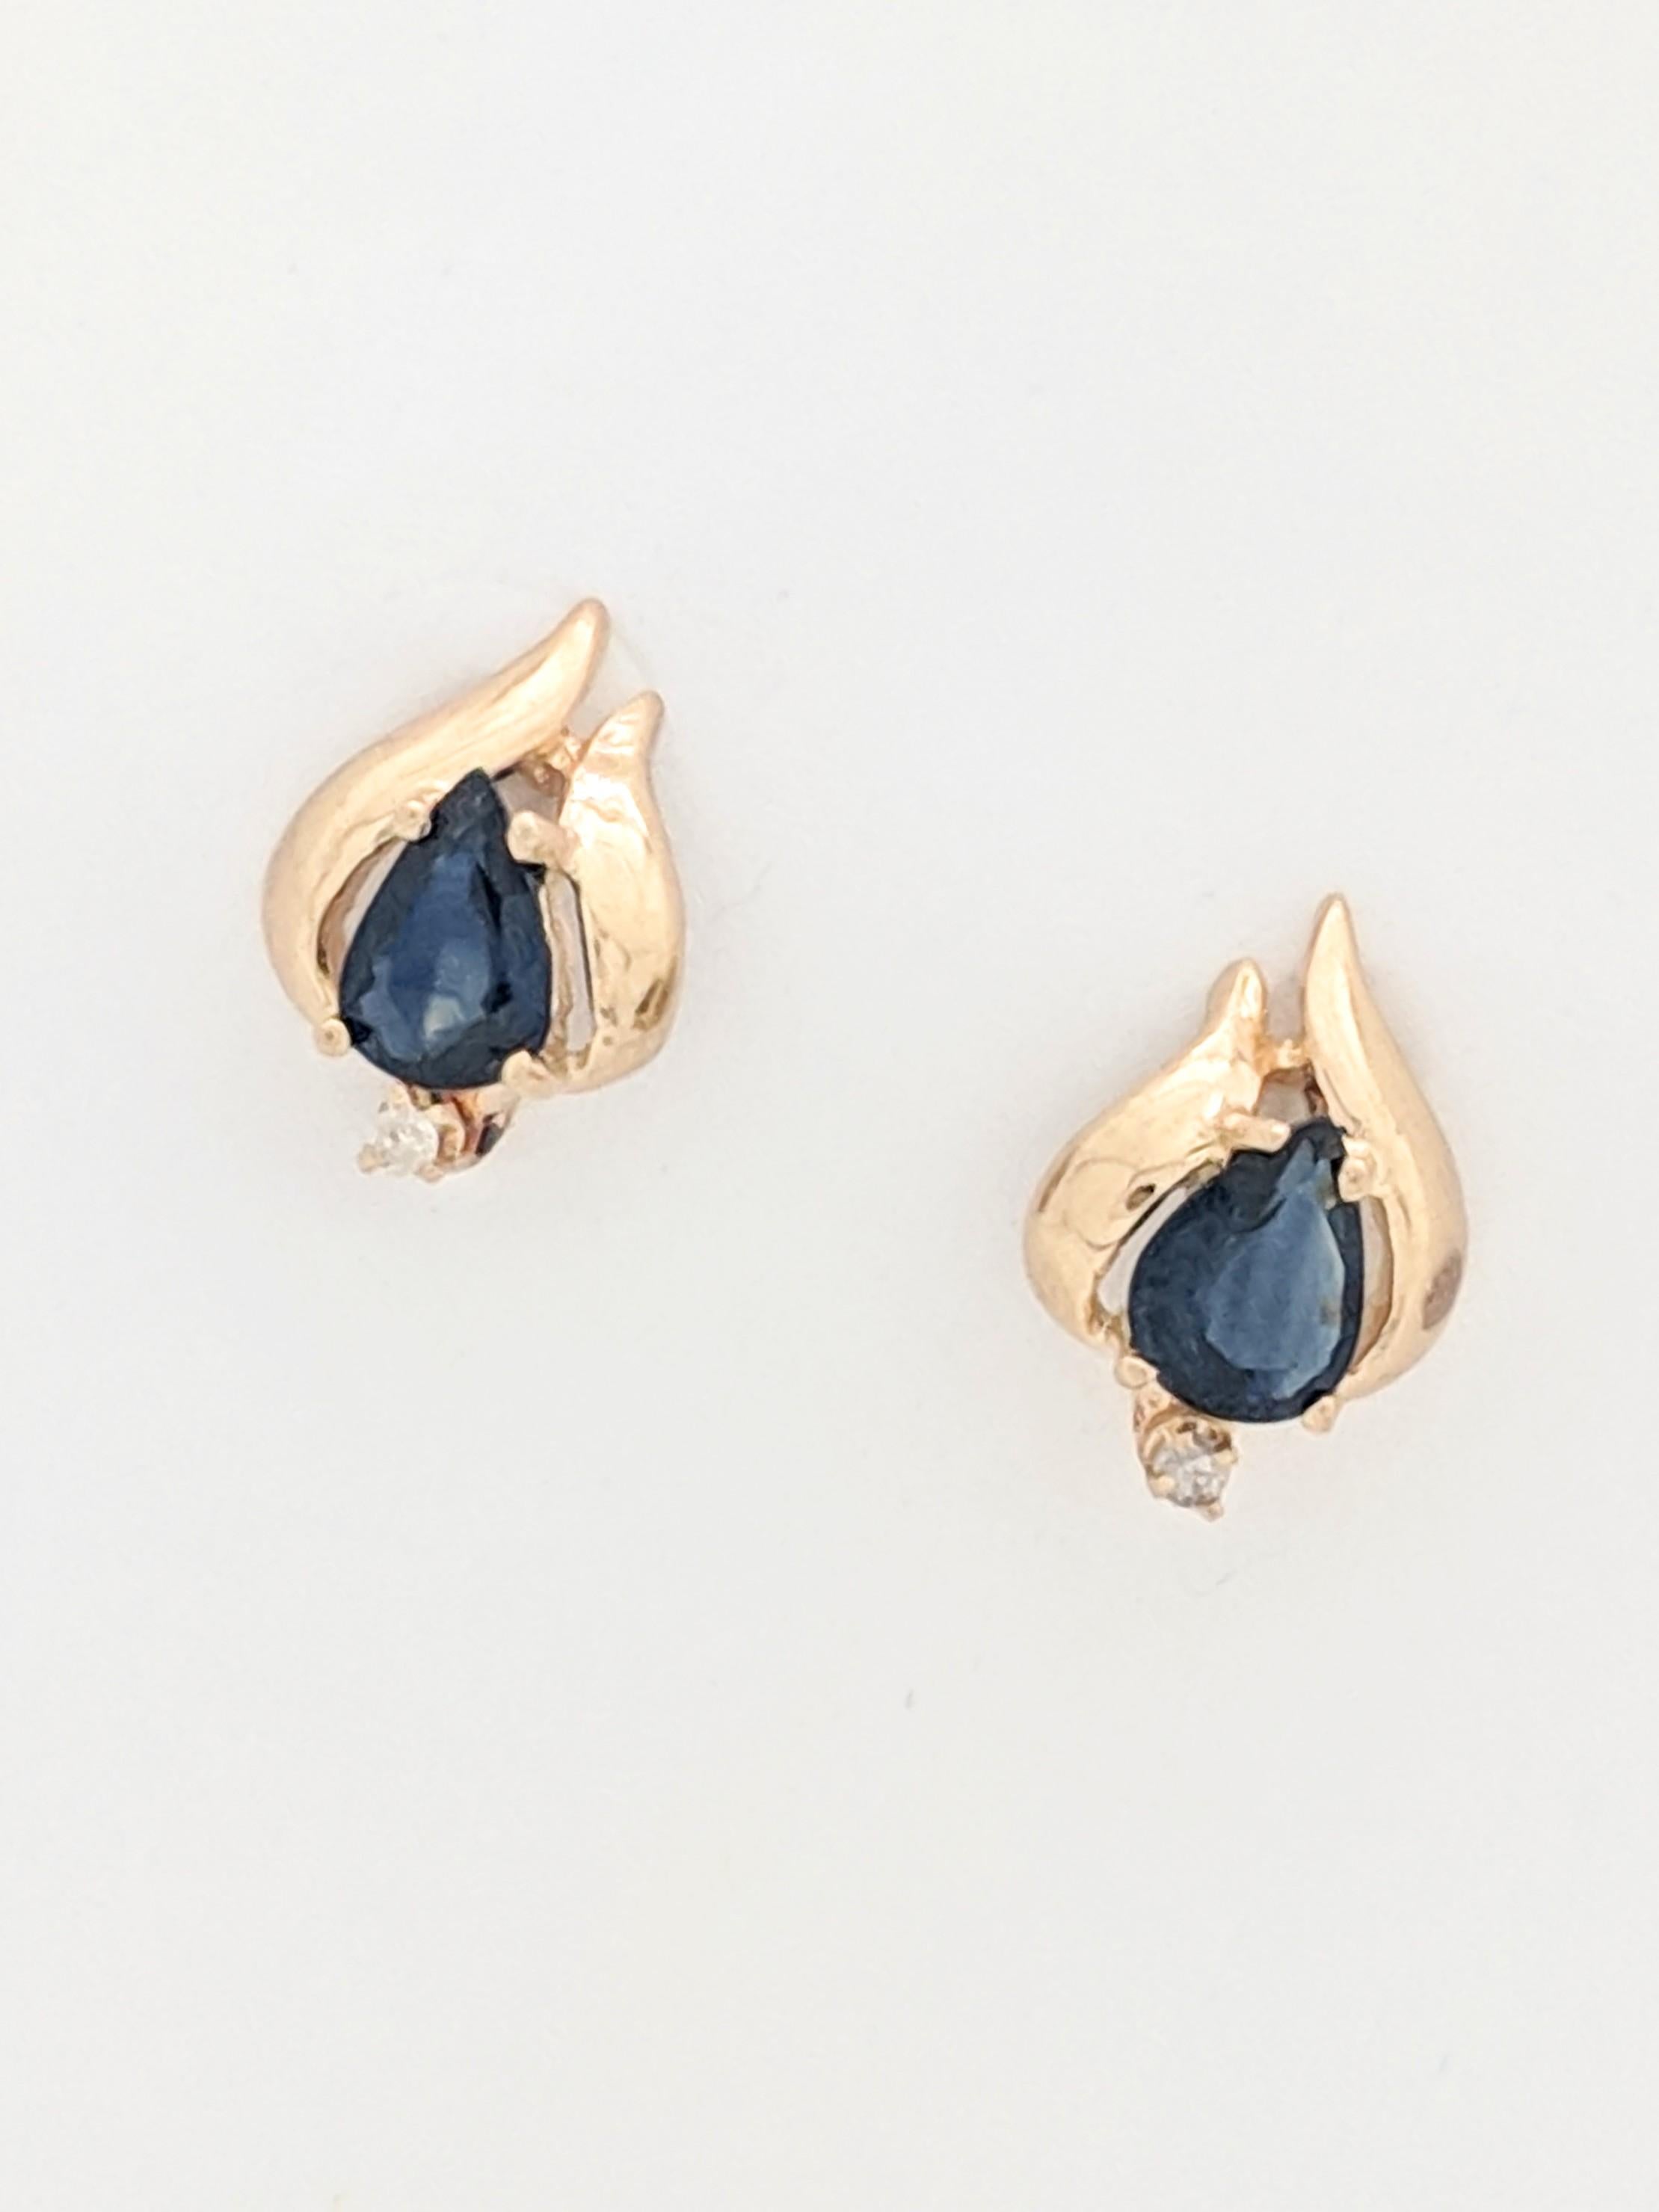 14K Yellow Gold Sapphire and Diamond Stud Earrings

You are viewing a beautiful pair of sapphire & diamond stud earrings.

The earrings are crafted from 14k yellow gold and weighs 2.8 gram. Each earring features (1) pear shaped blue sapphire and (1)